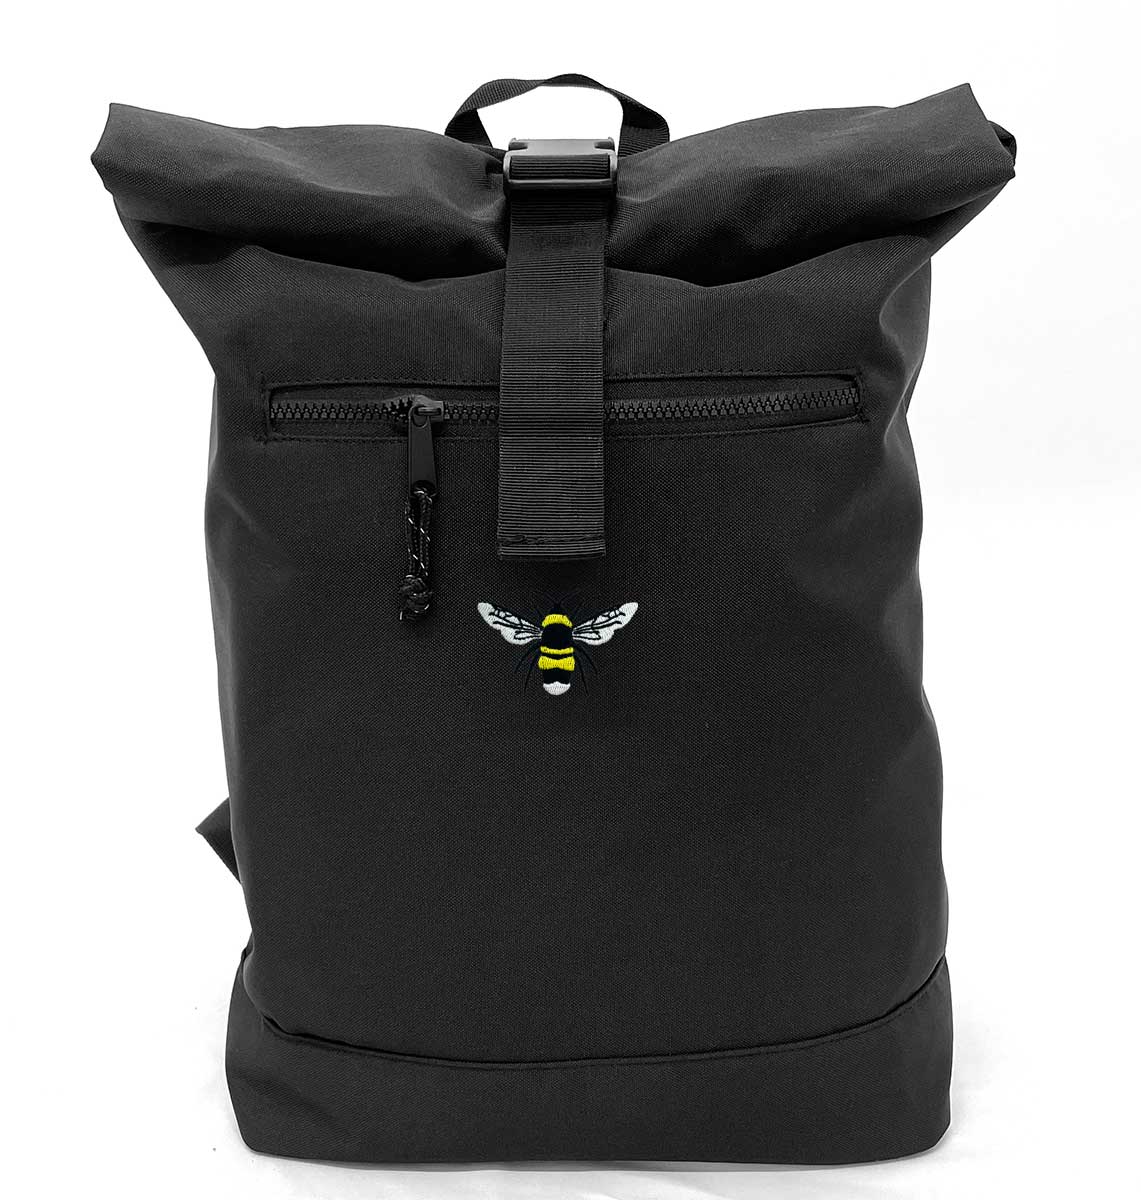 Bumble Bee Beach Roll-top Recycled Backpack - Blue Panda